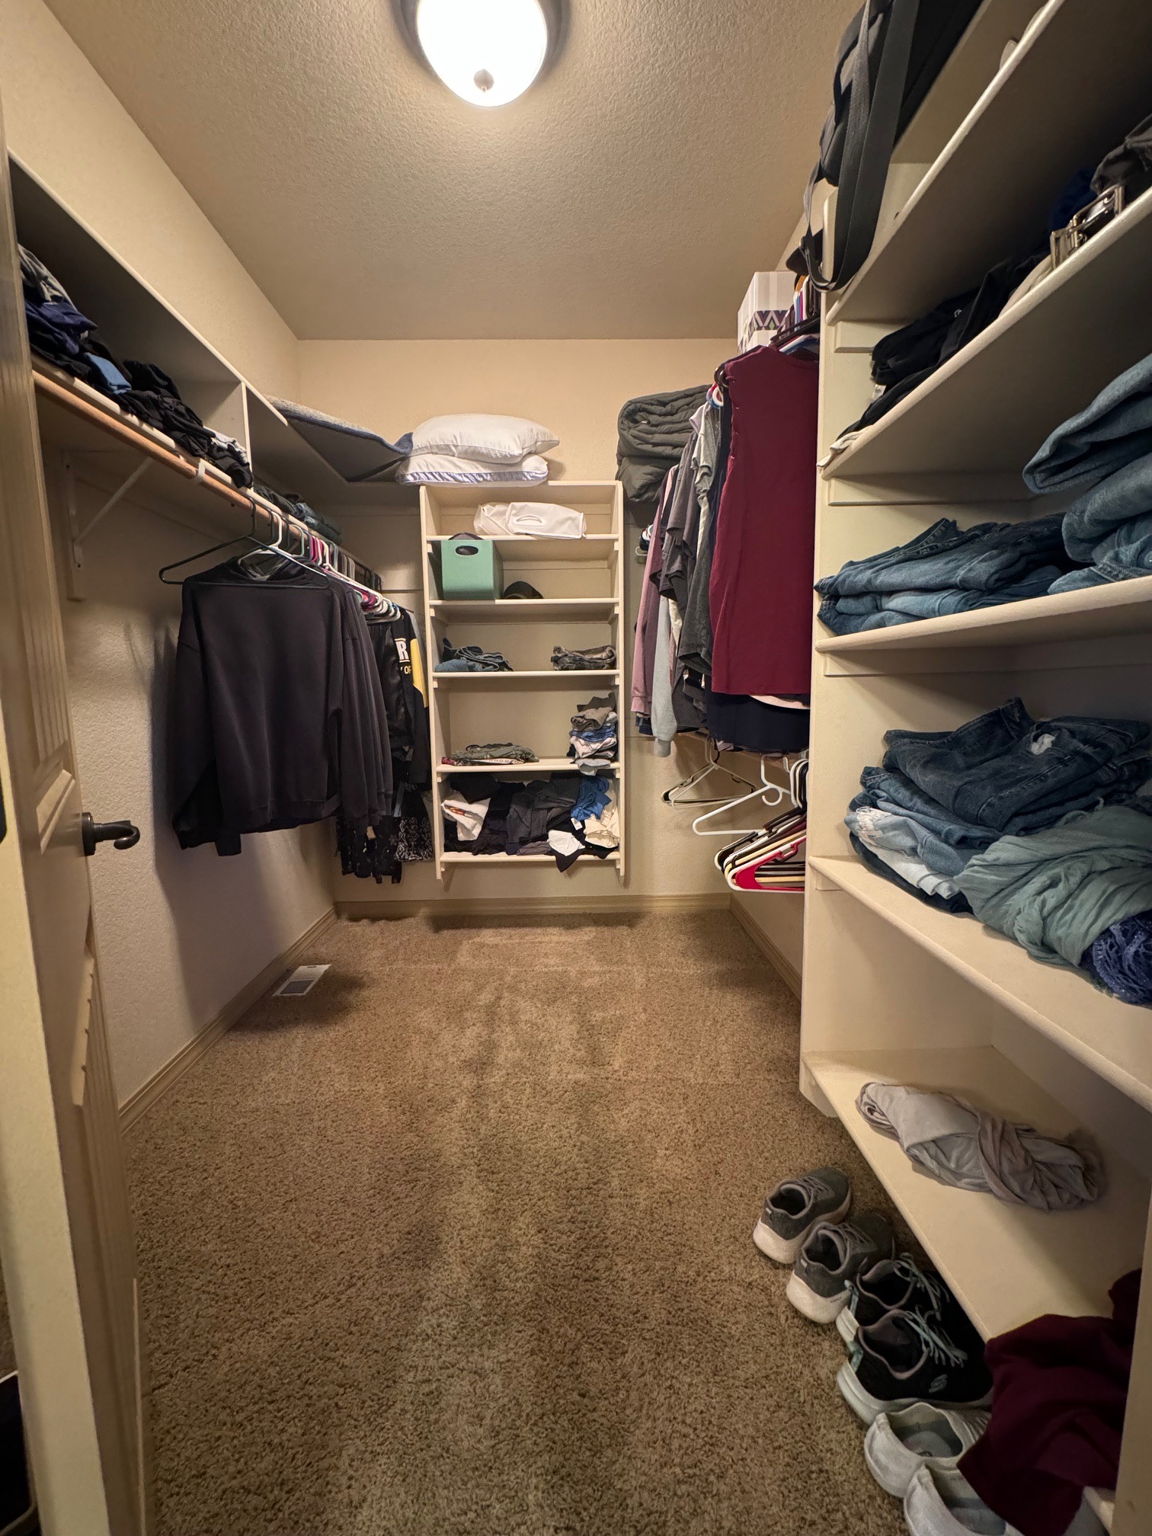 Primary Walk-in Closet with wood shelving